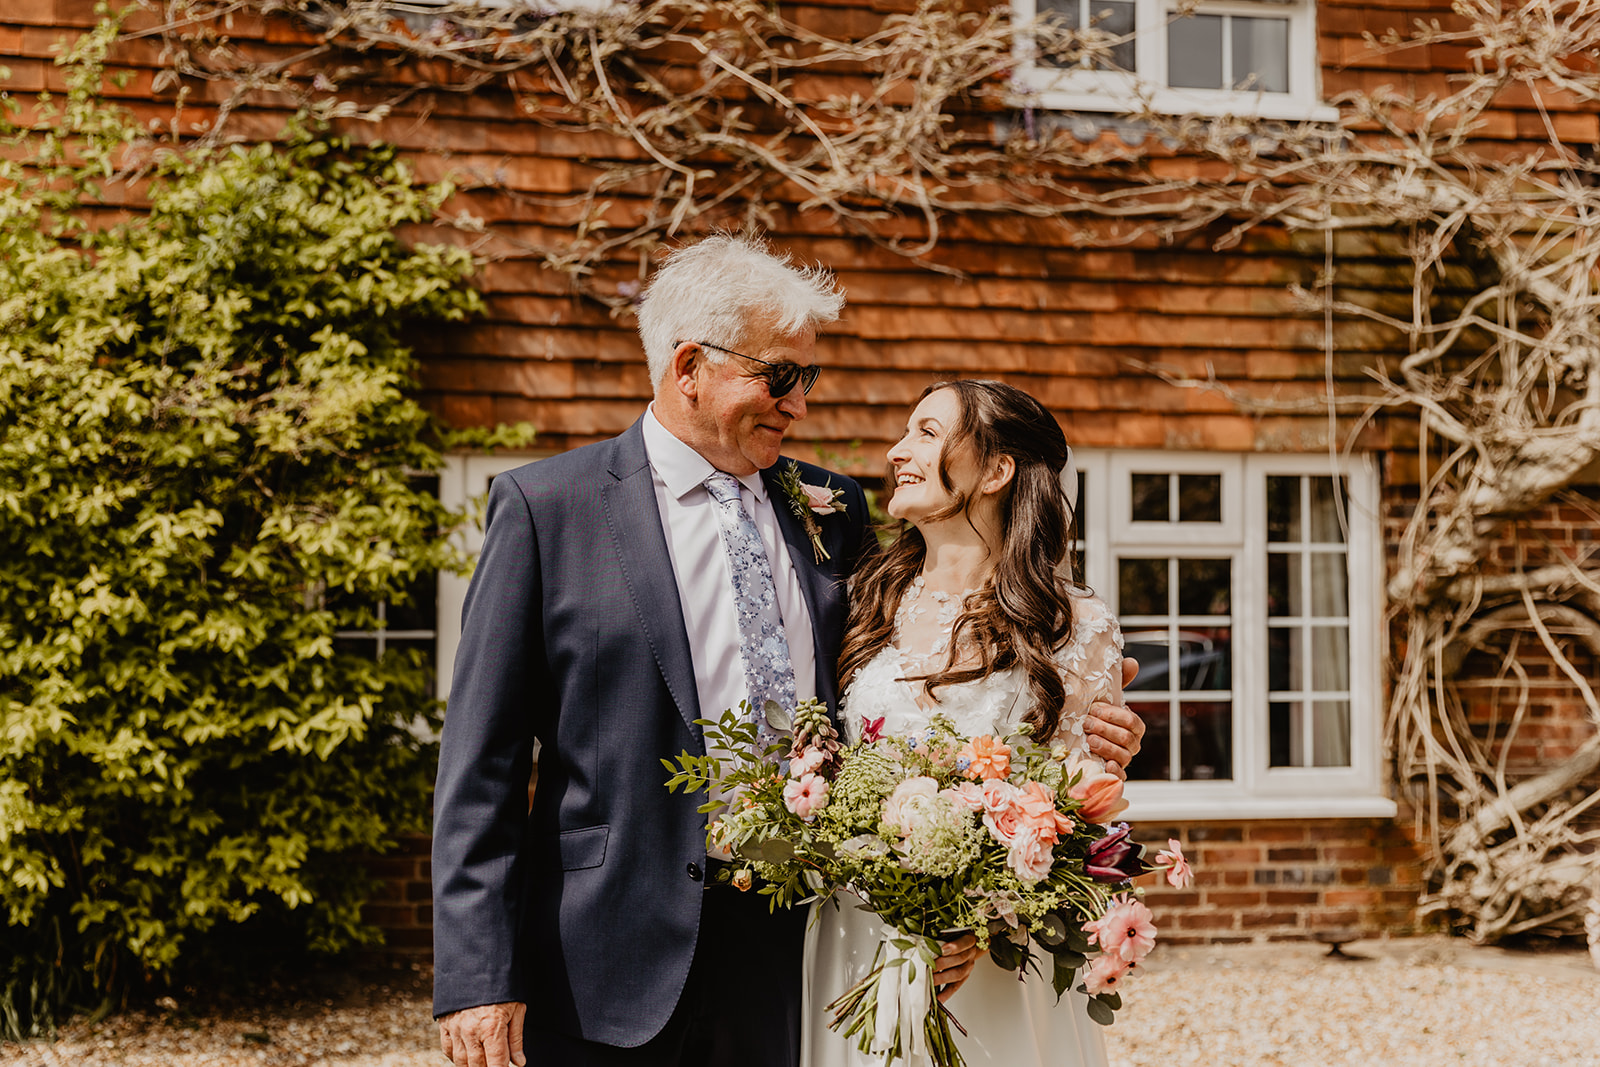 Bride and her father at a Secret Barn Wedding, West Sussex. By Olive Joy Photography